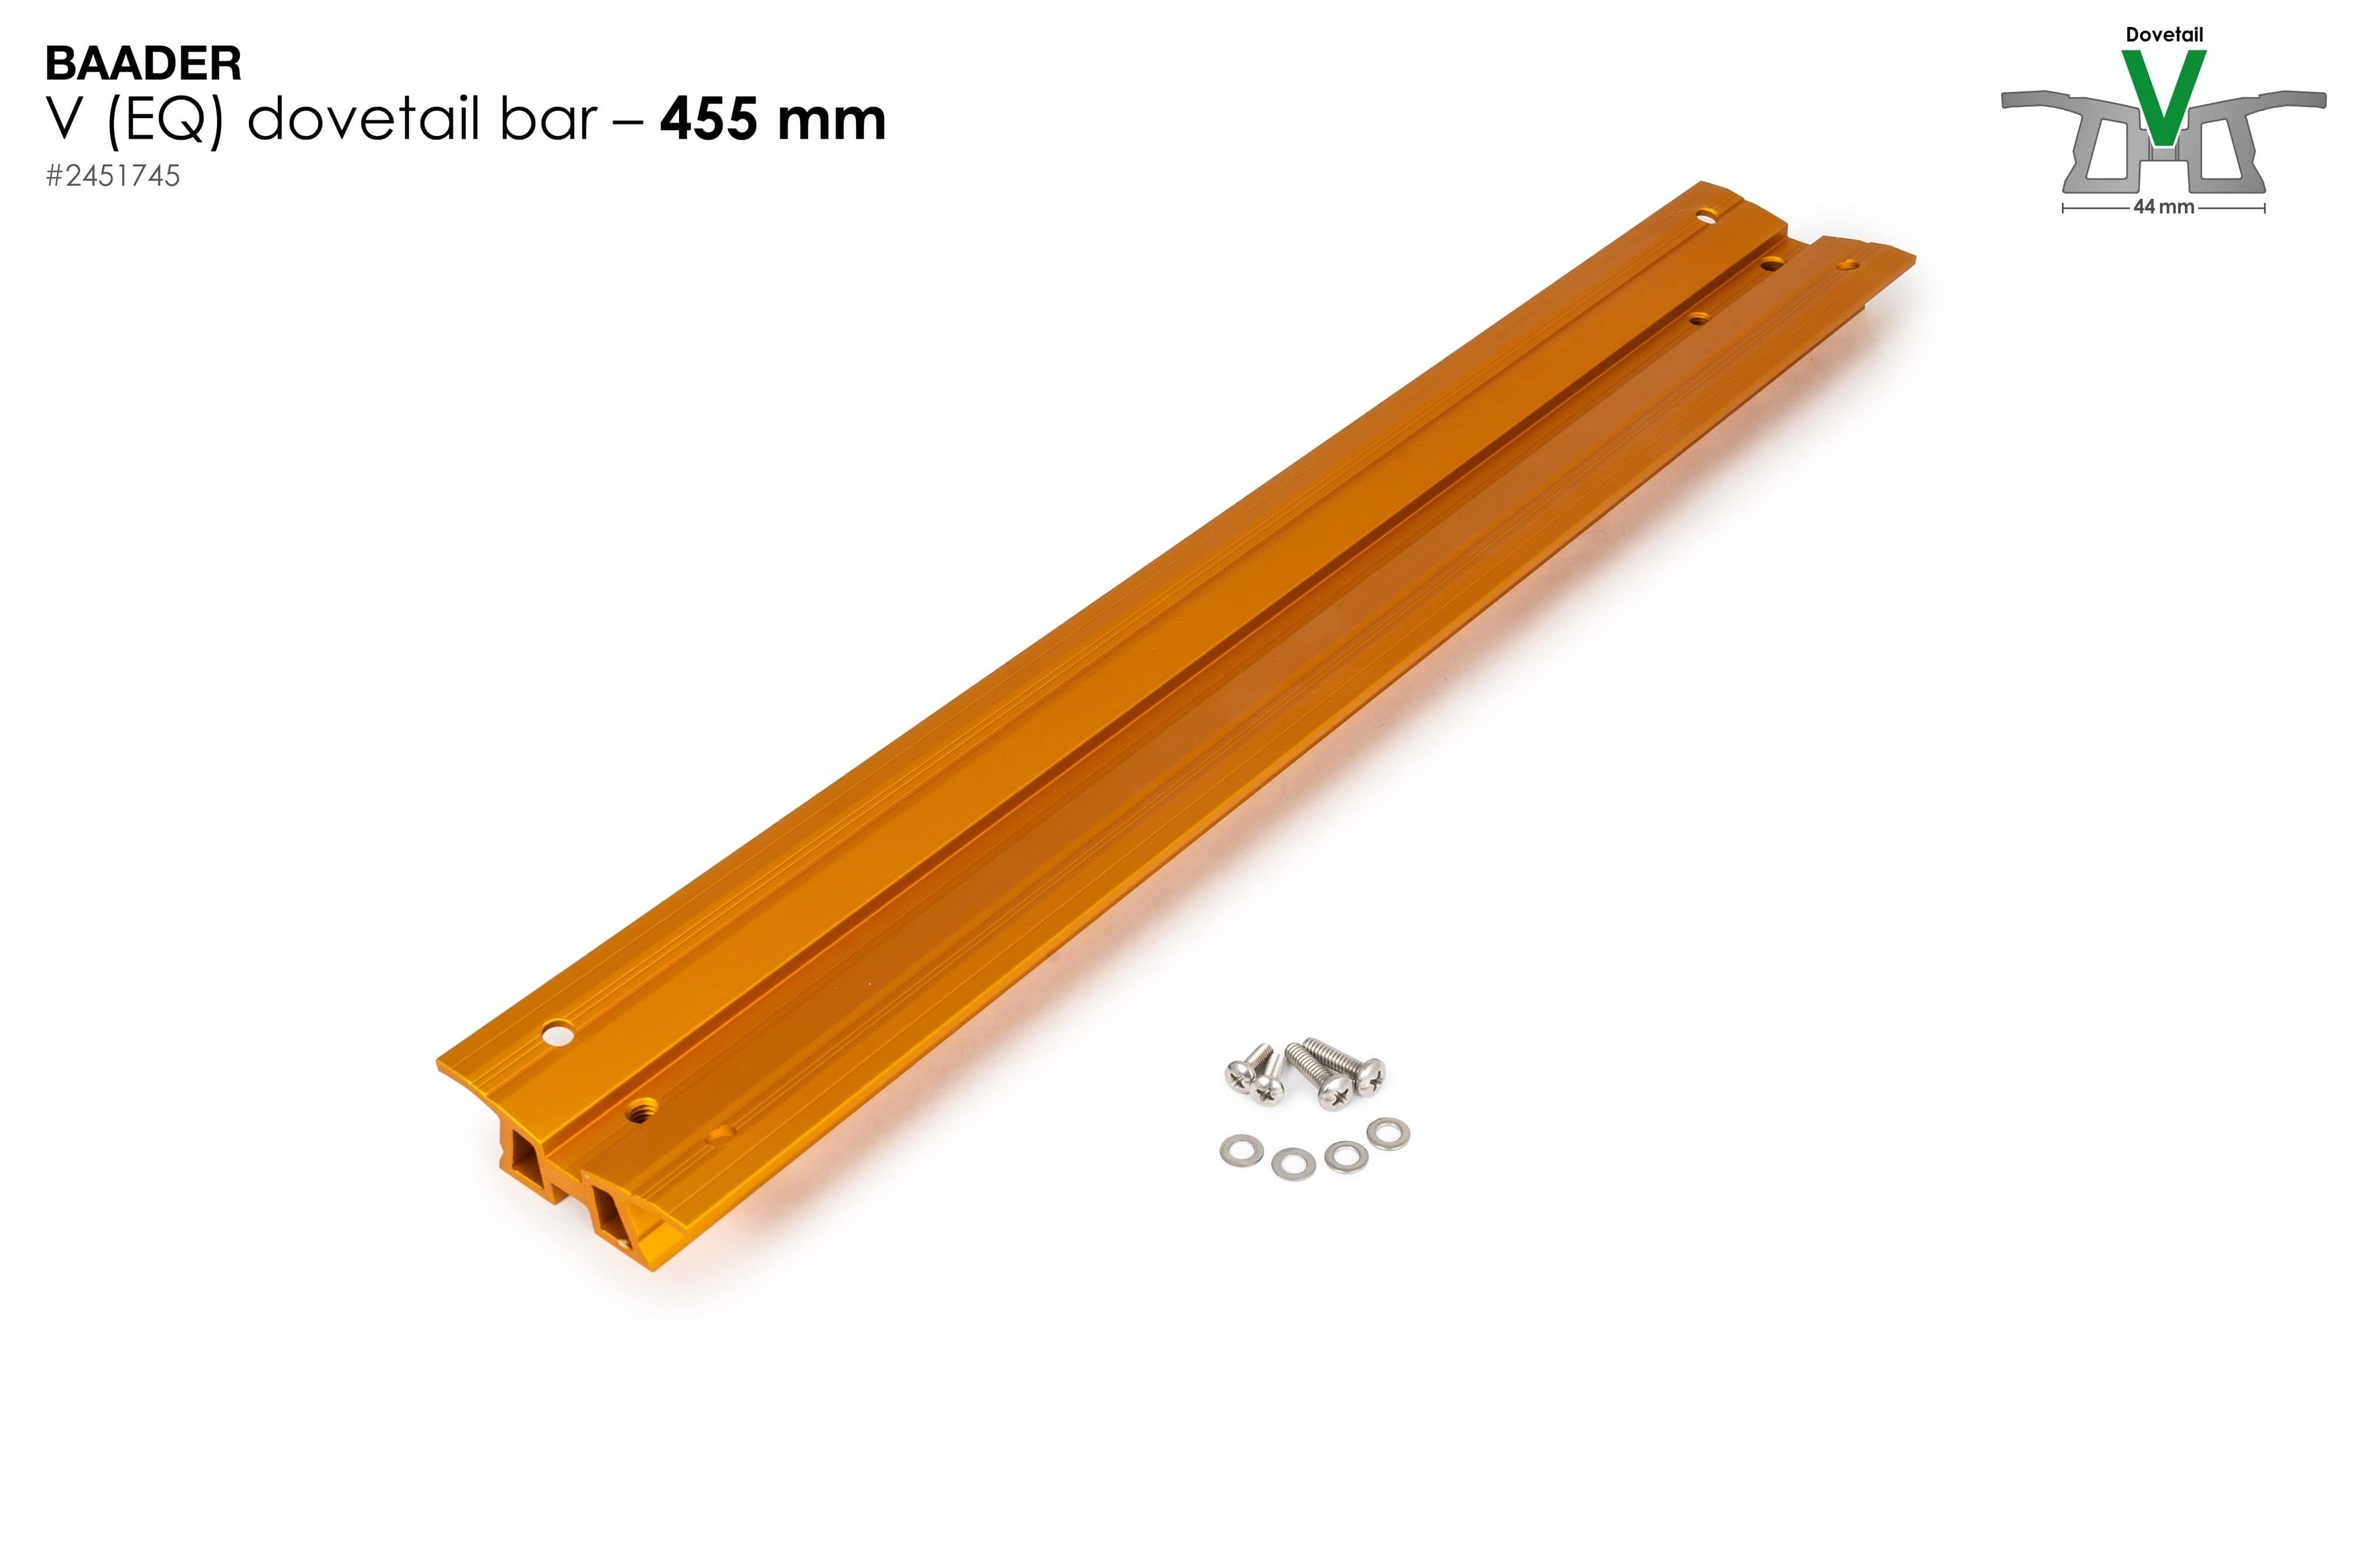 Baader Planetarium Accessory Baader V-Dove Tail orange anodized, 455mm long, drilled for Celestron 9.25" and 11" SC / HD - 2451745